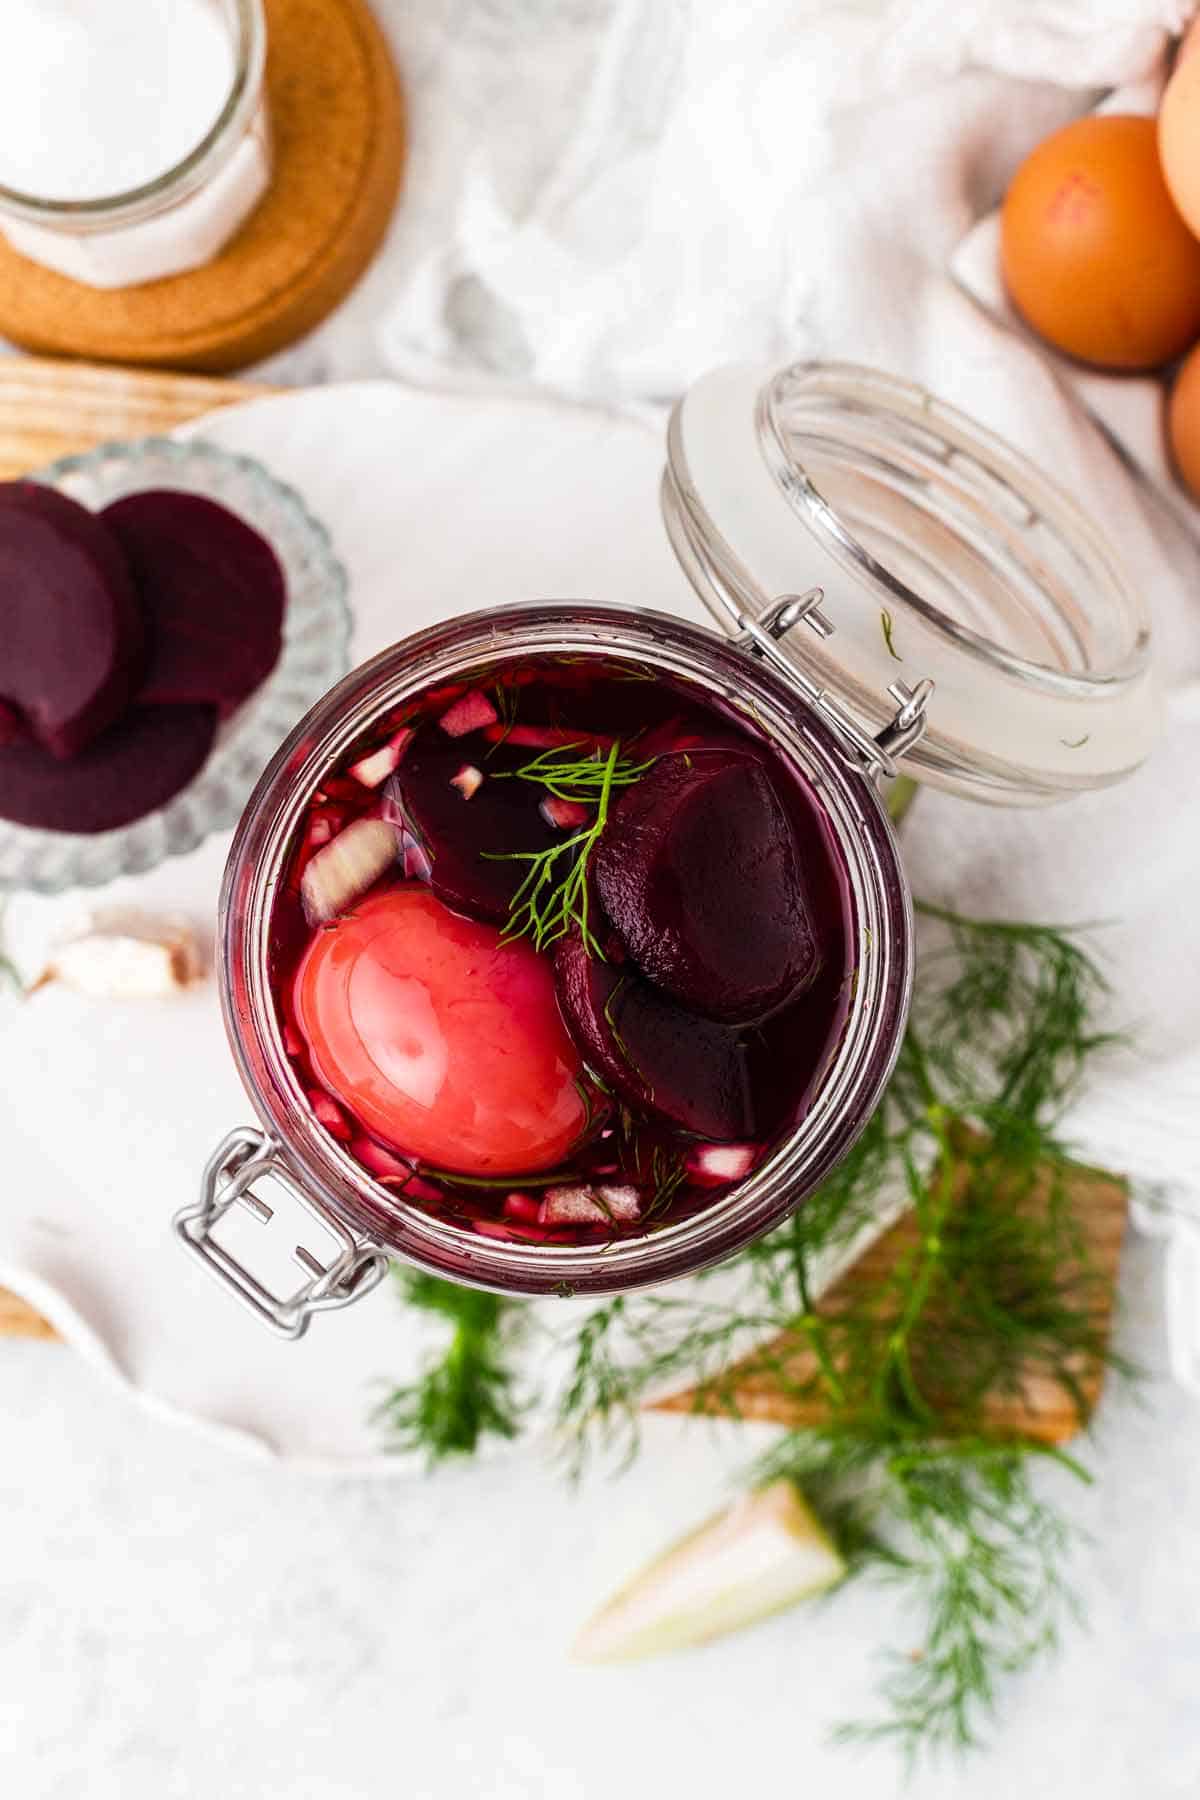 Pickled Eggs with Beets, Dill and Garlic